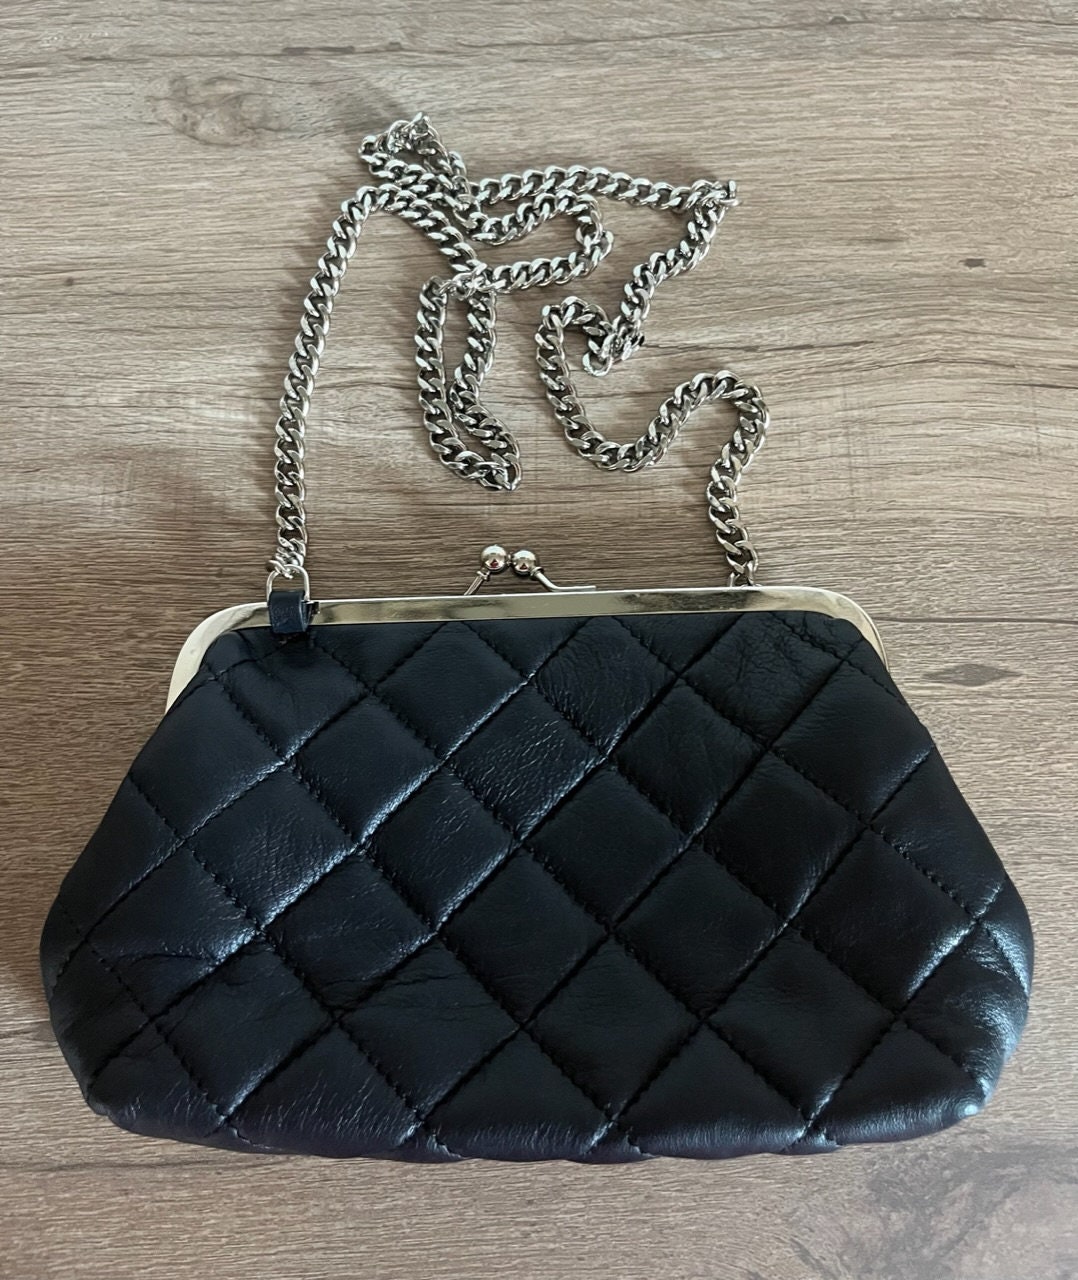 Black Leather Quilted Purse Chain Strap Margot New York 